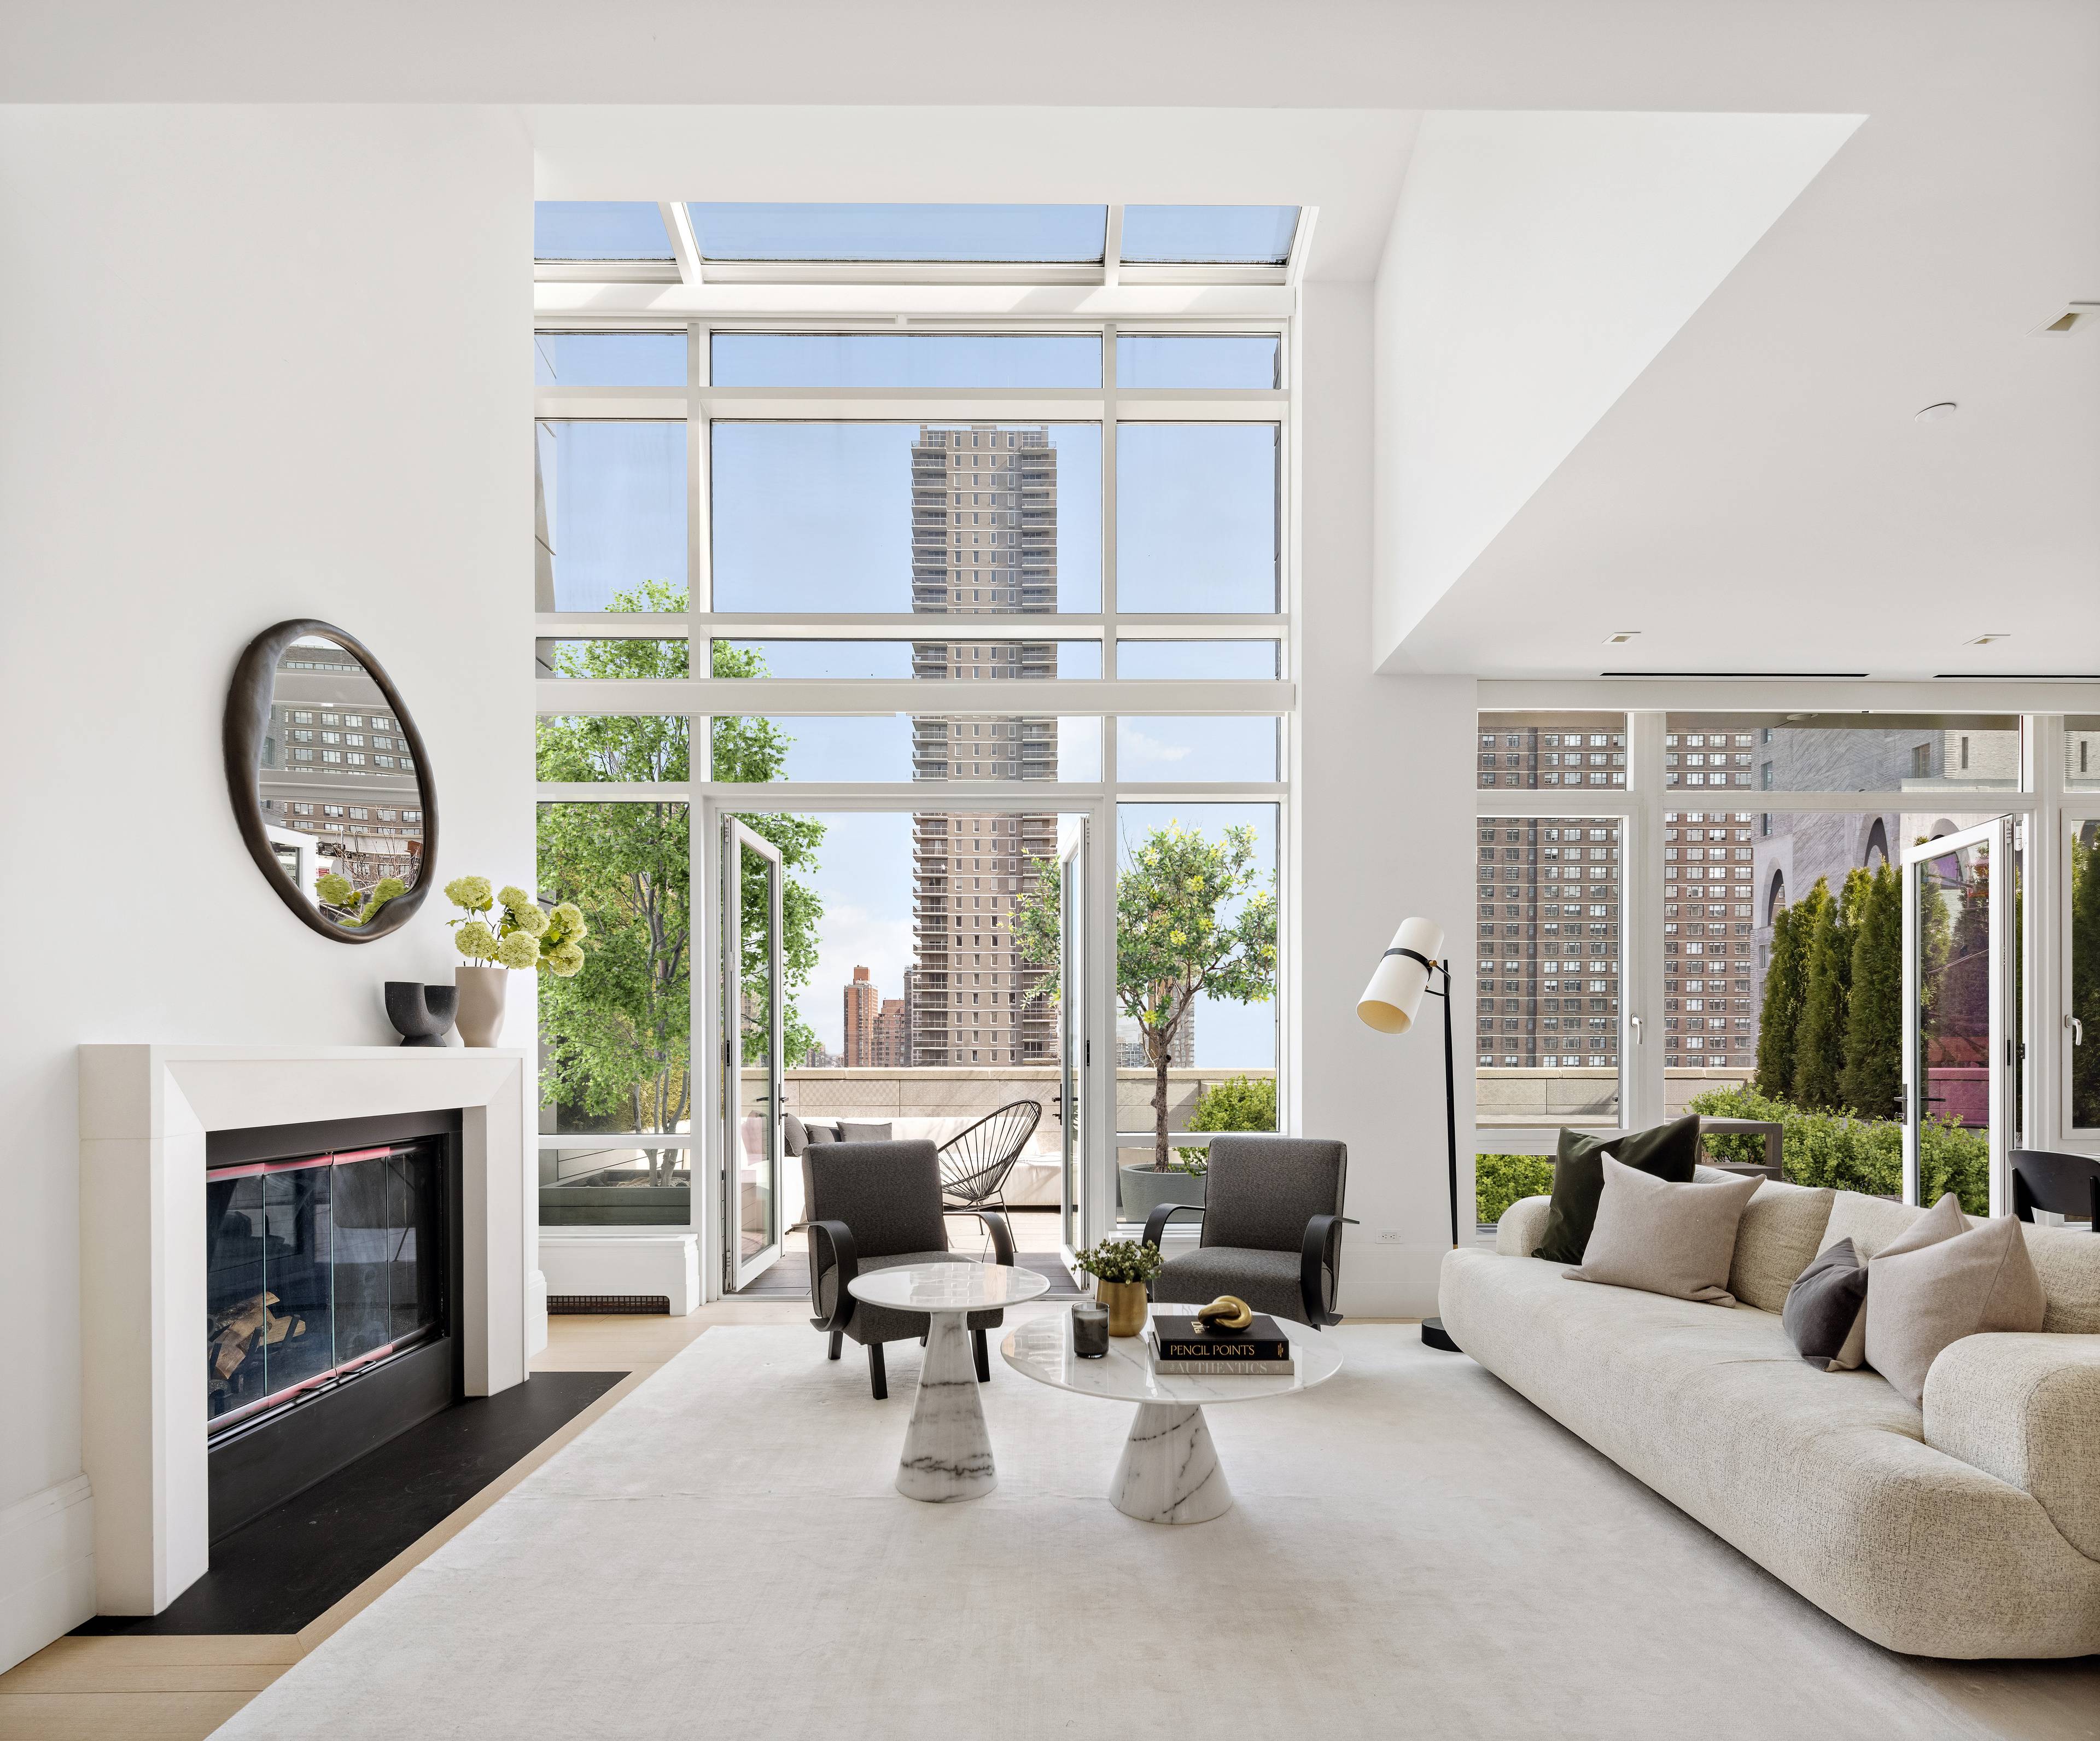 Every room of this bright, breathtaking penthouse leads out onto the four private, usable terraces with open views.